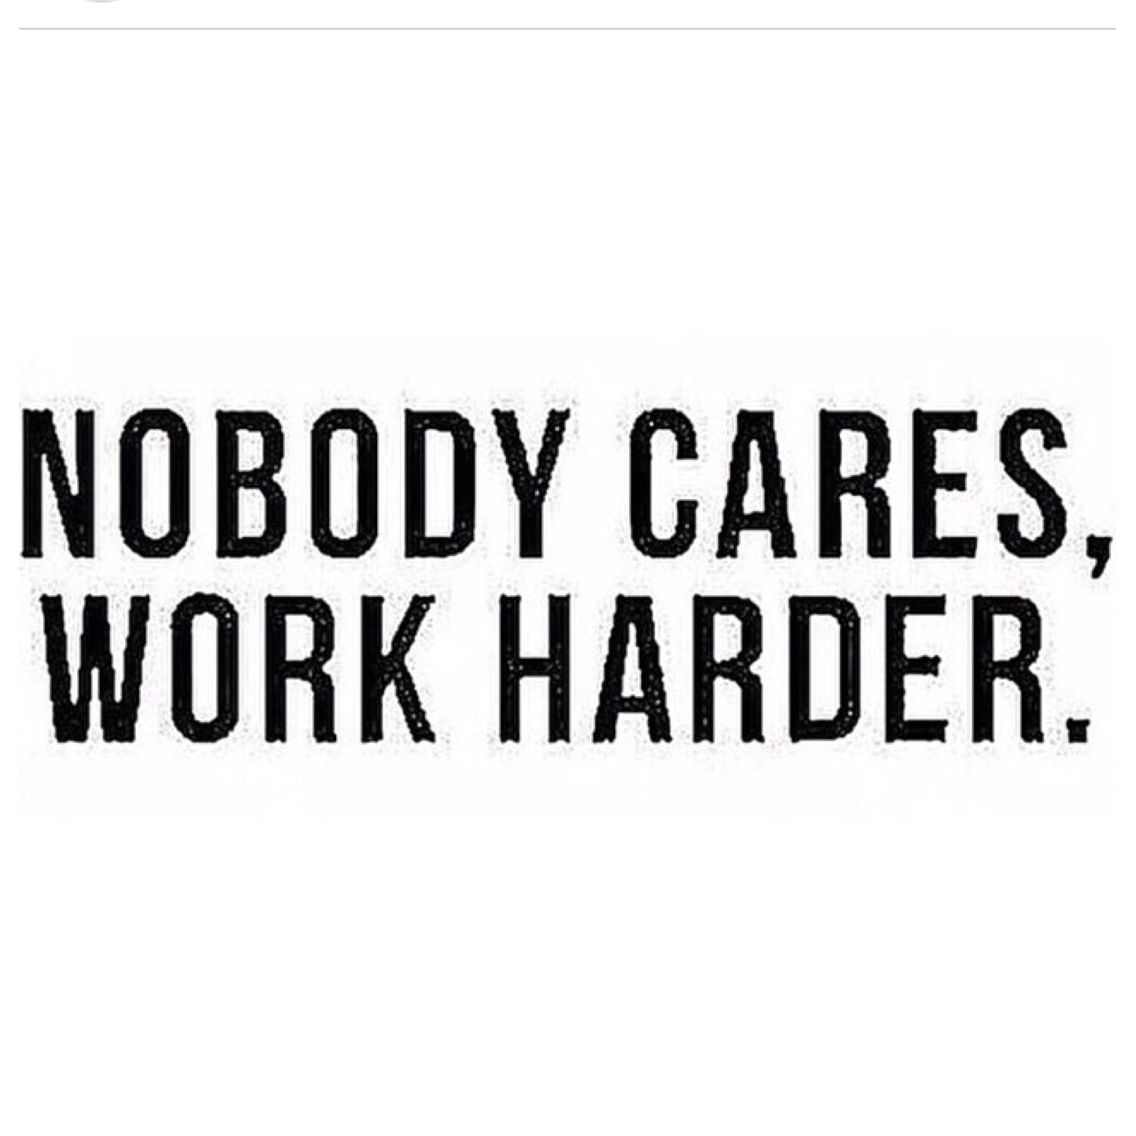 Nobody cares, work harder. Cool words, Quotes to live